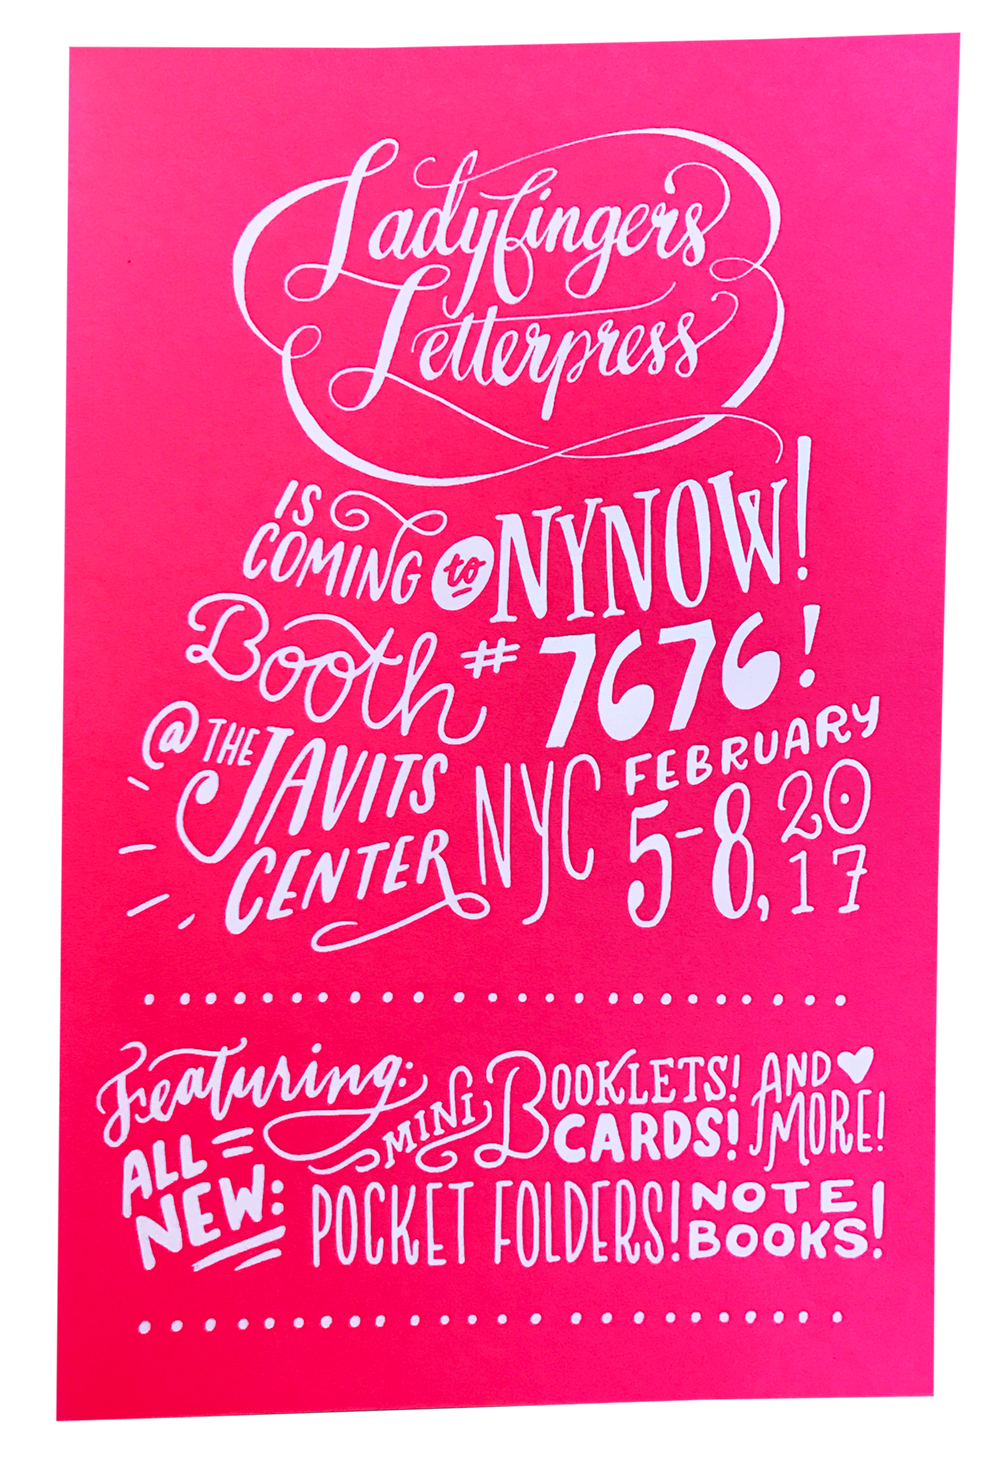 Ladyfingers Letterpress NYNOW Booth 7676